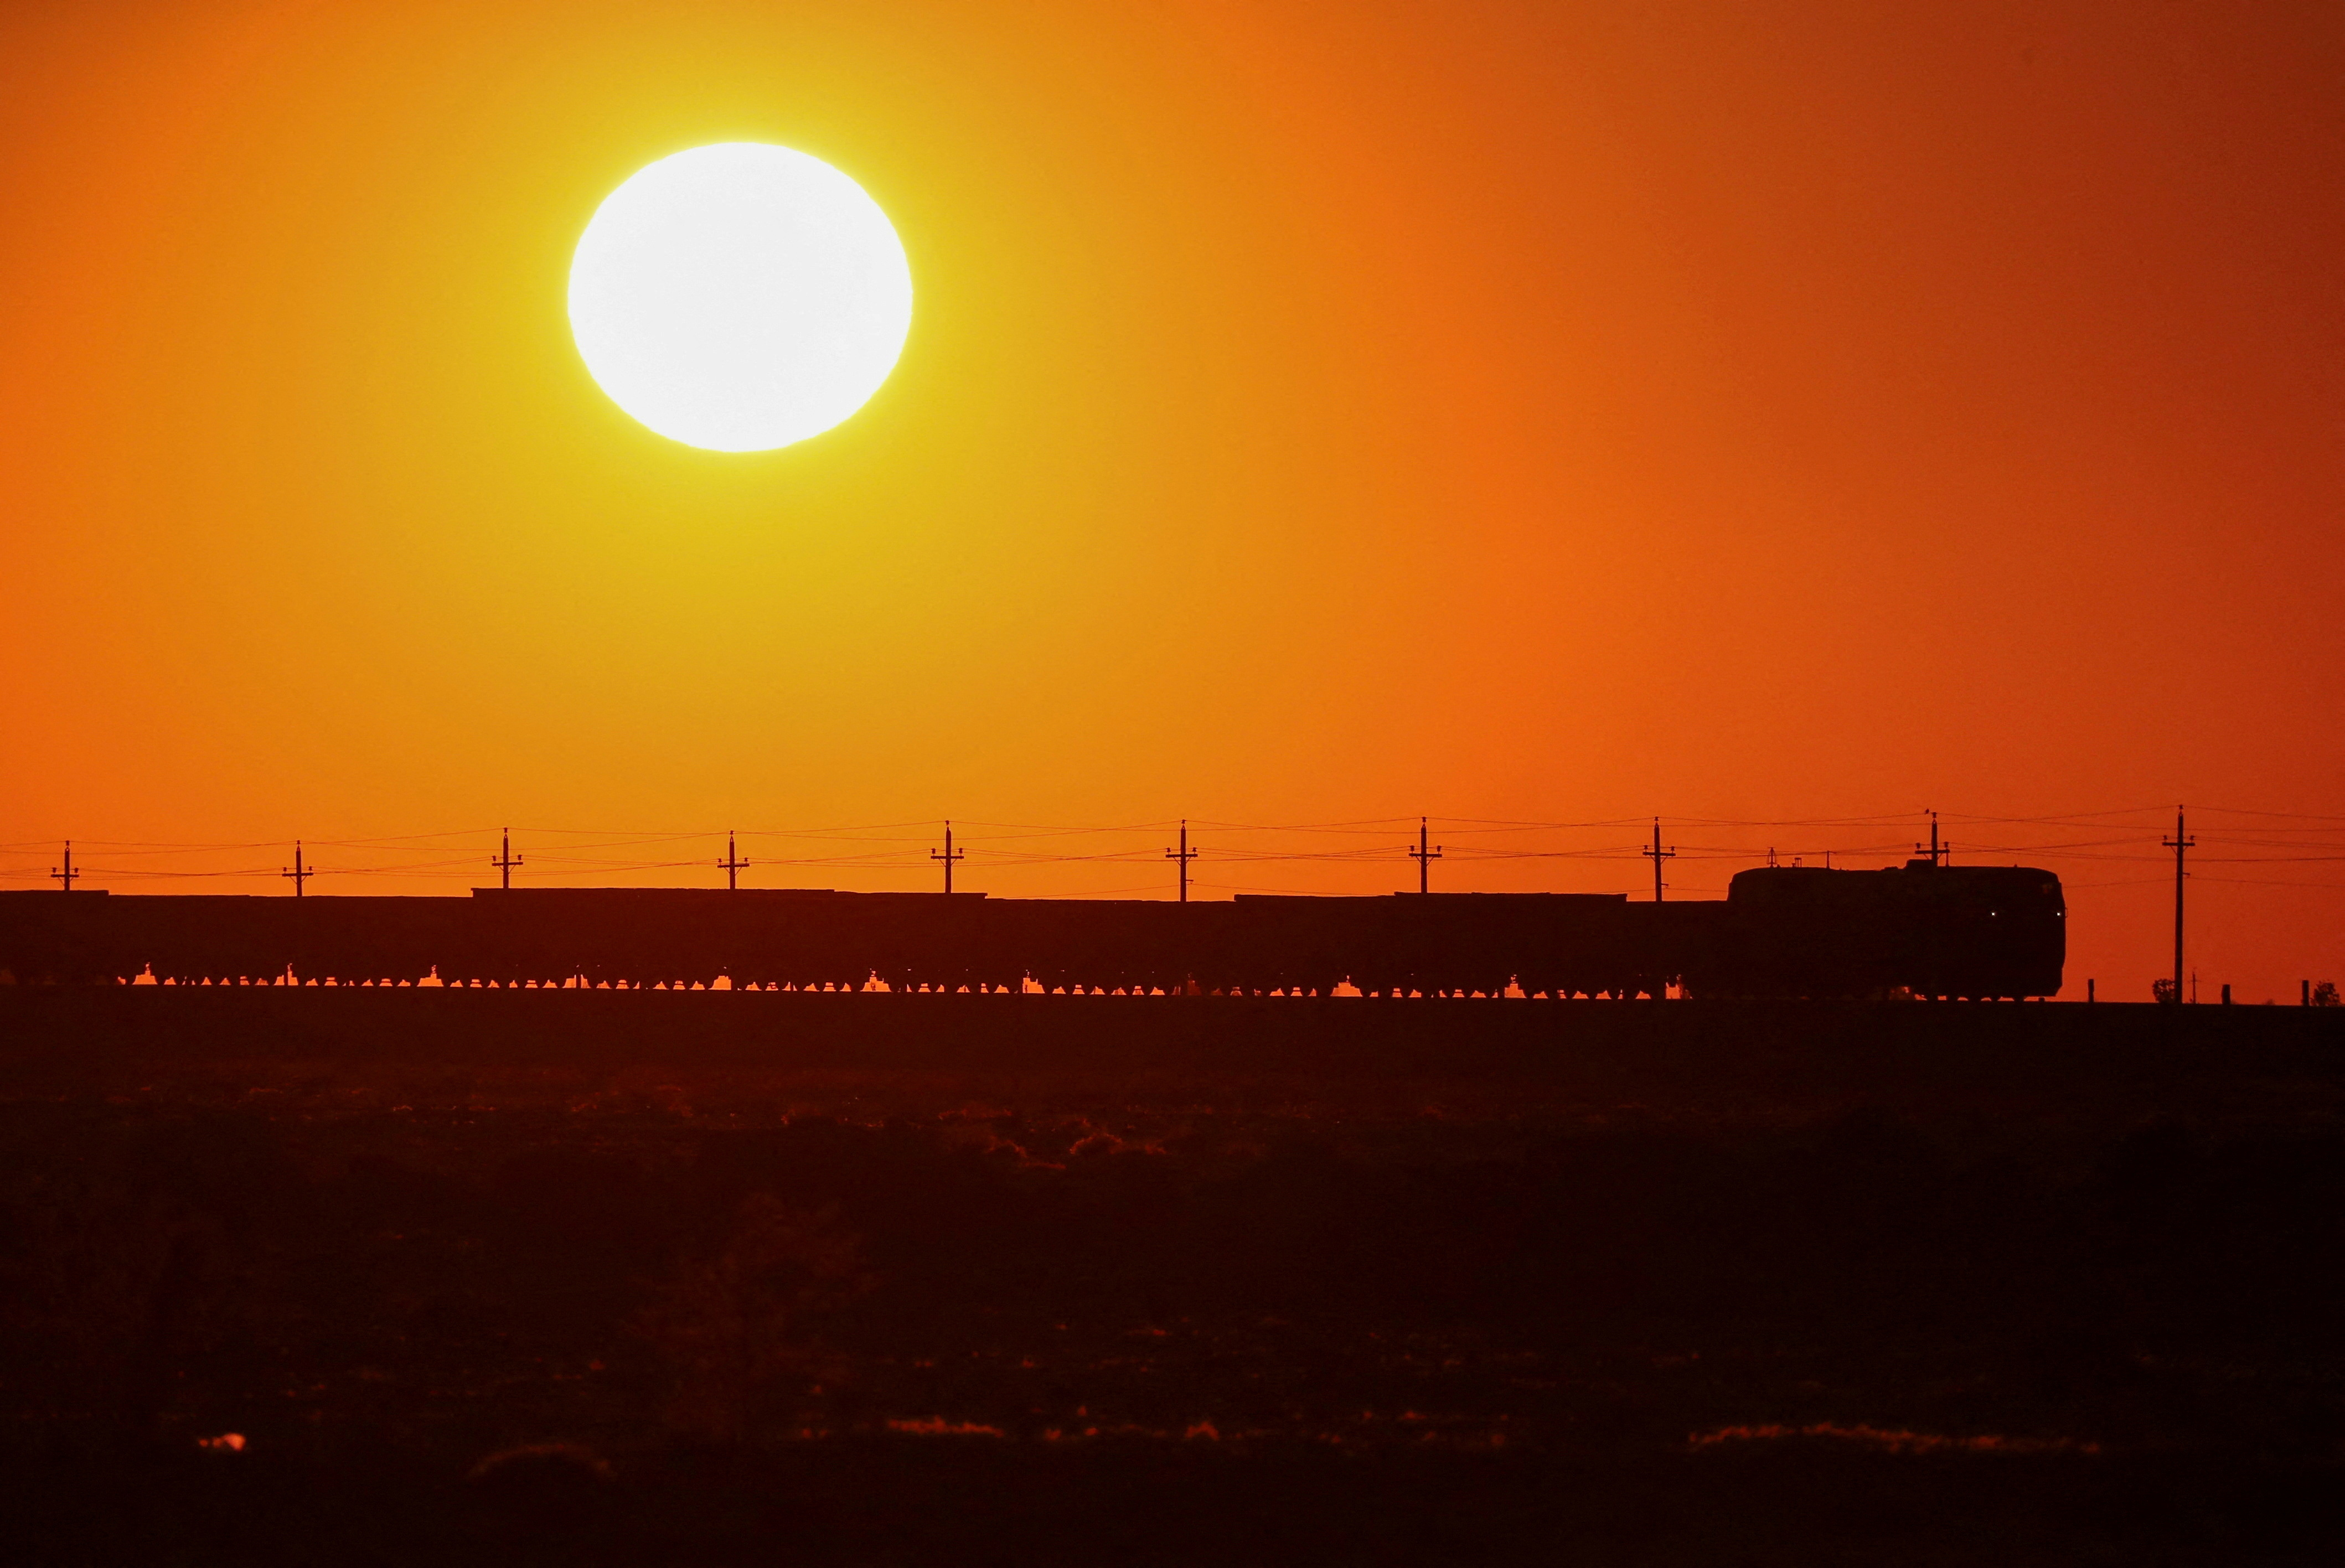 A freight train moves during sunset in the Almaty region